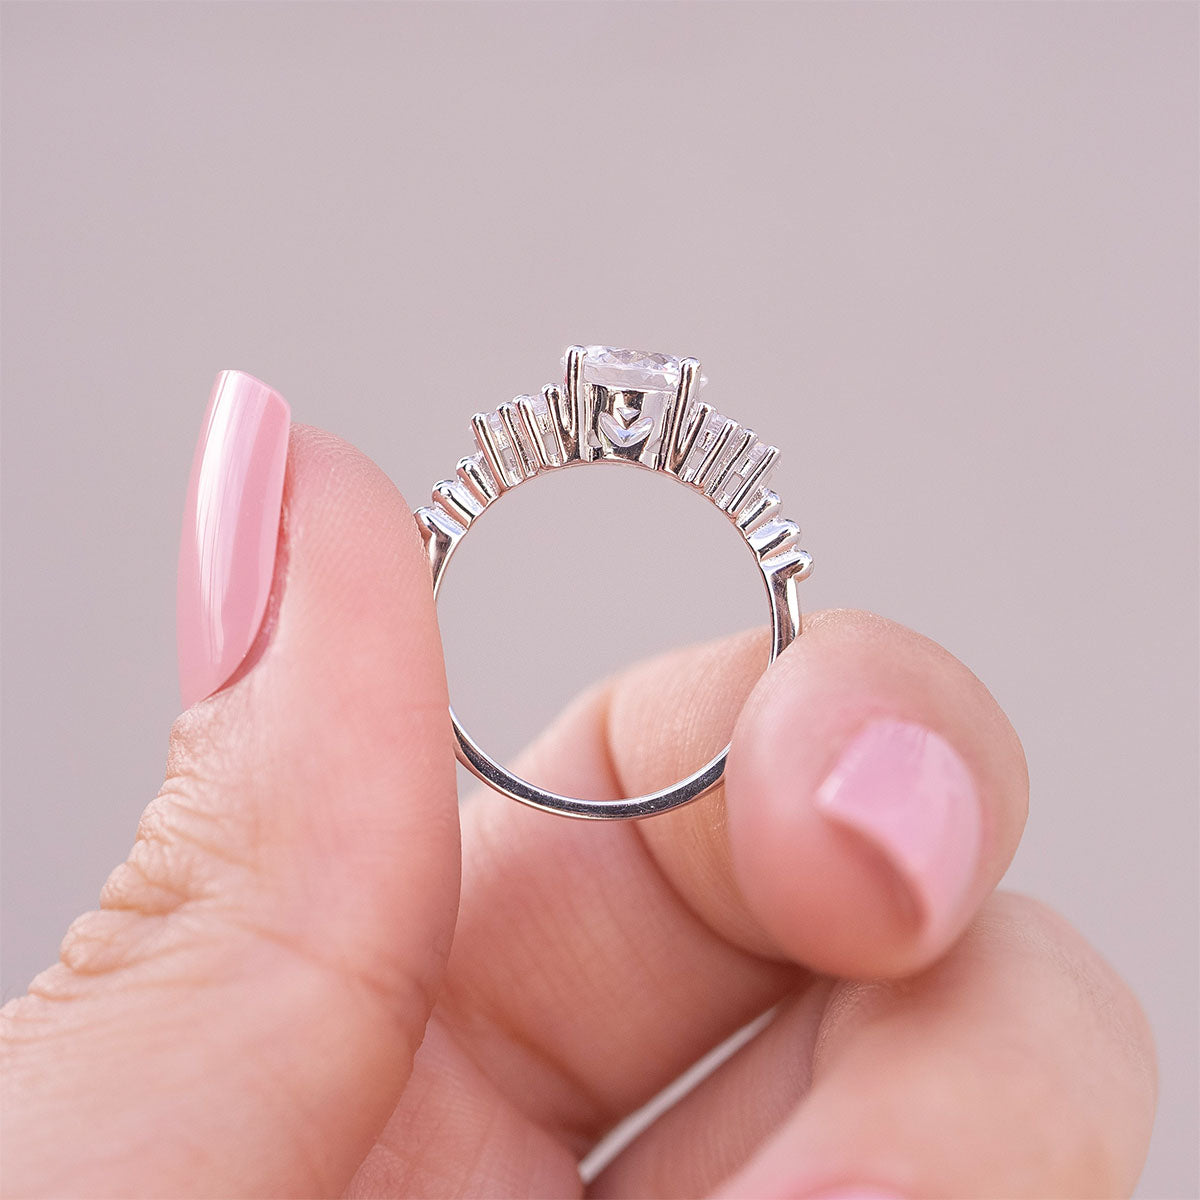 Side profile of the I Do engagement ring